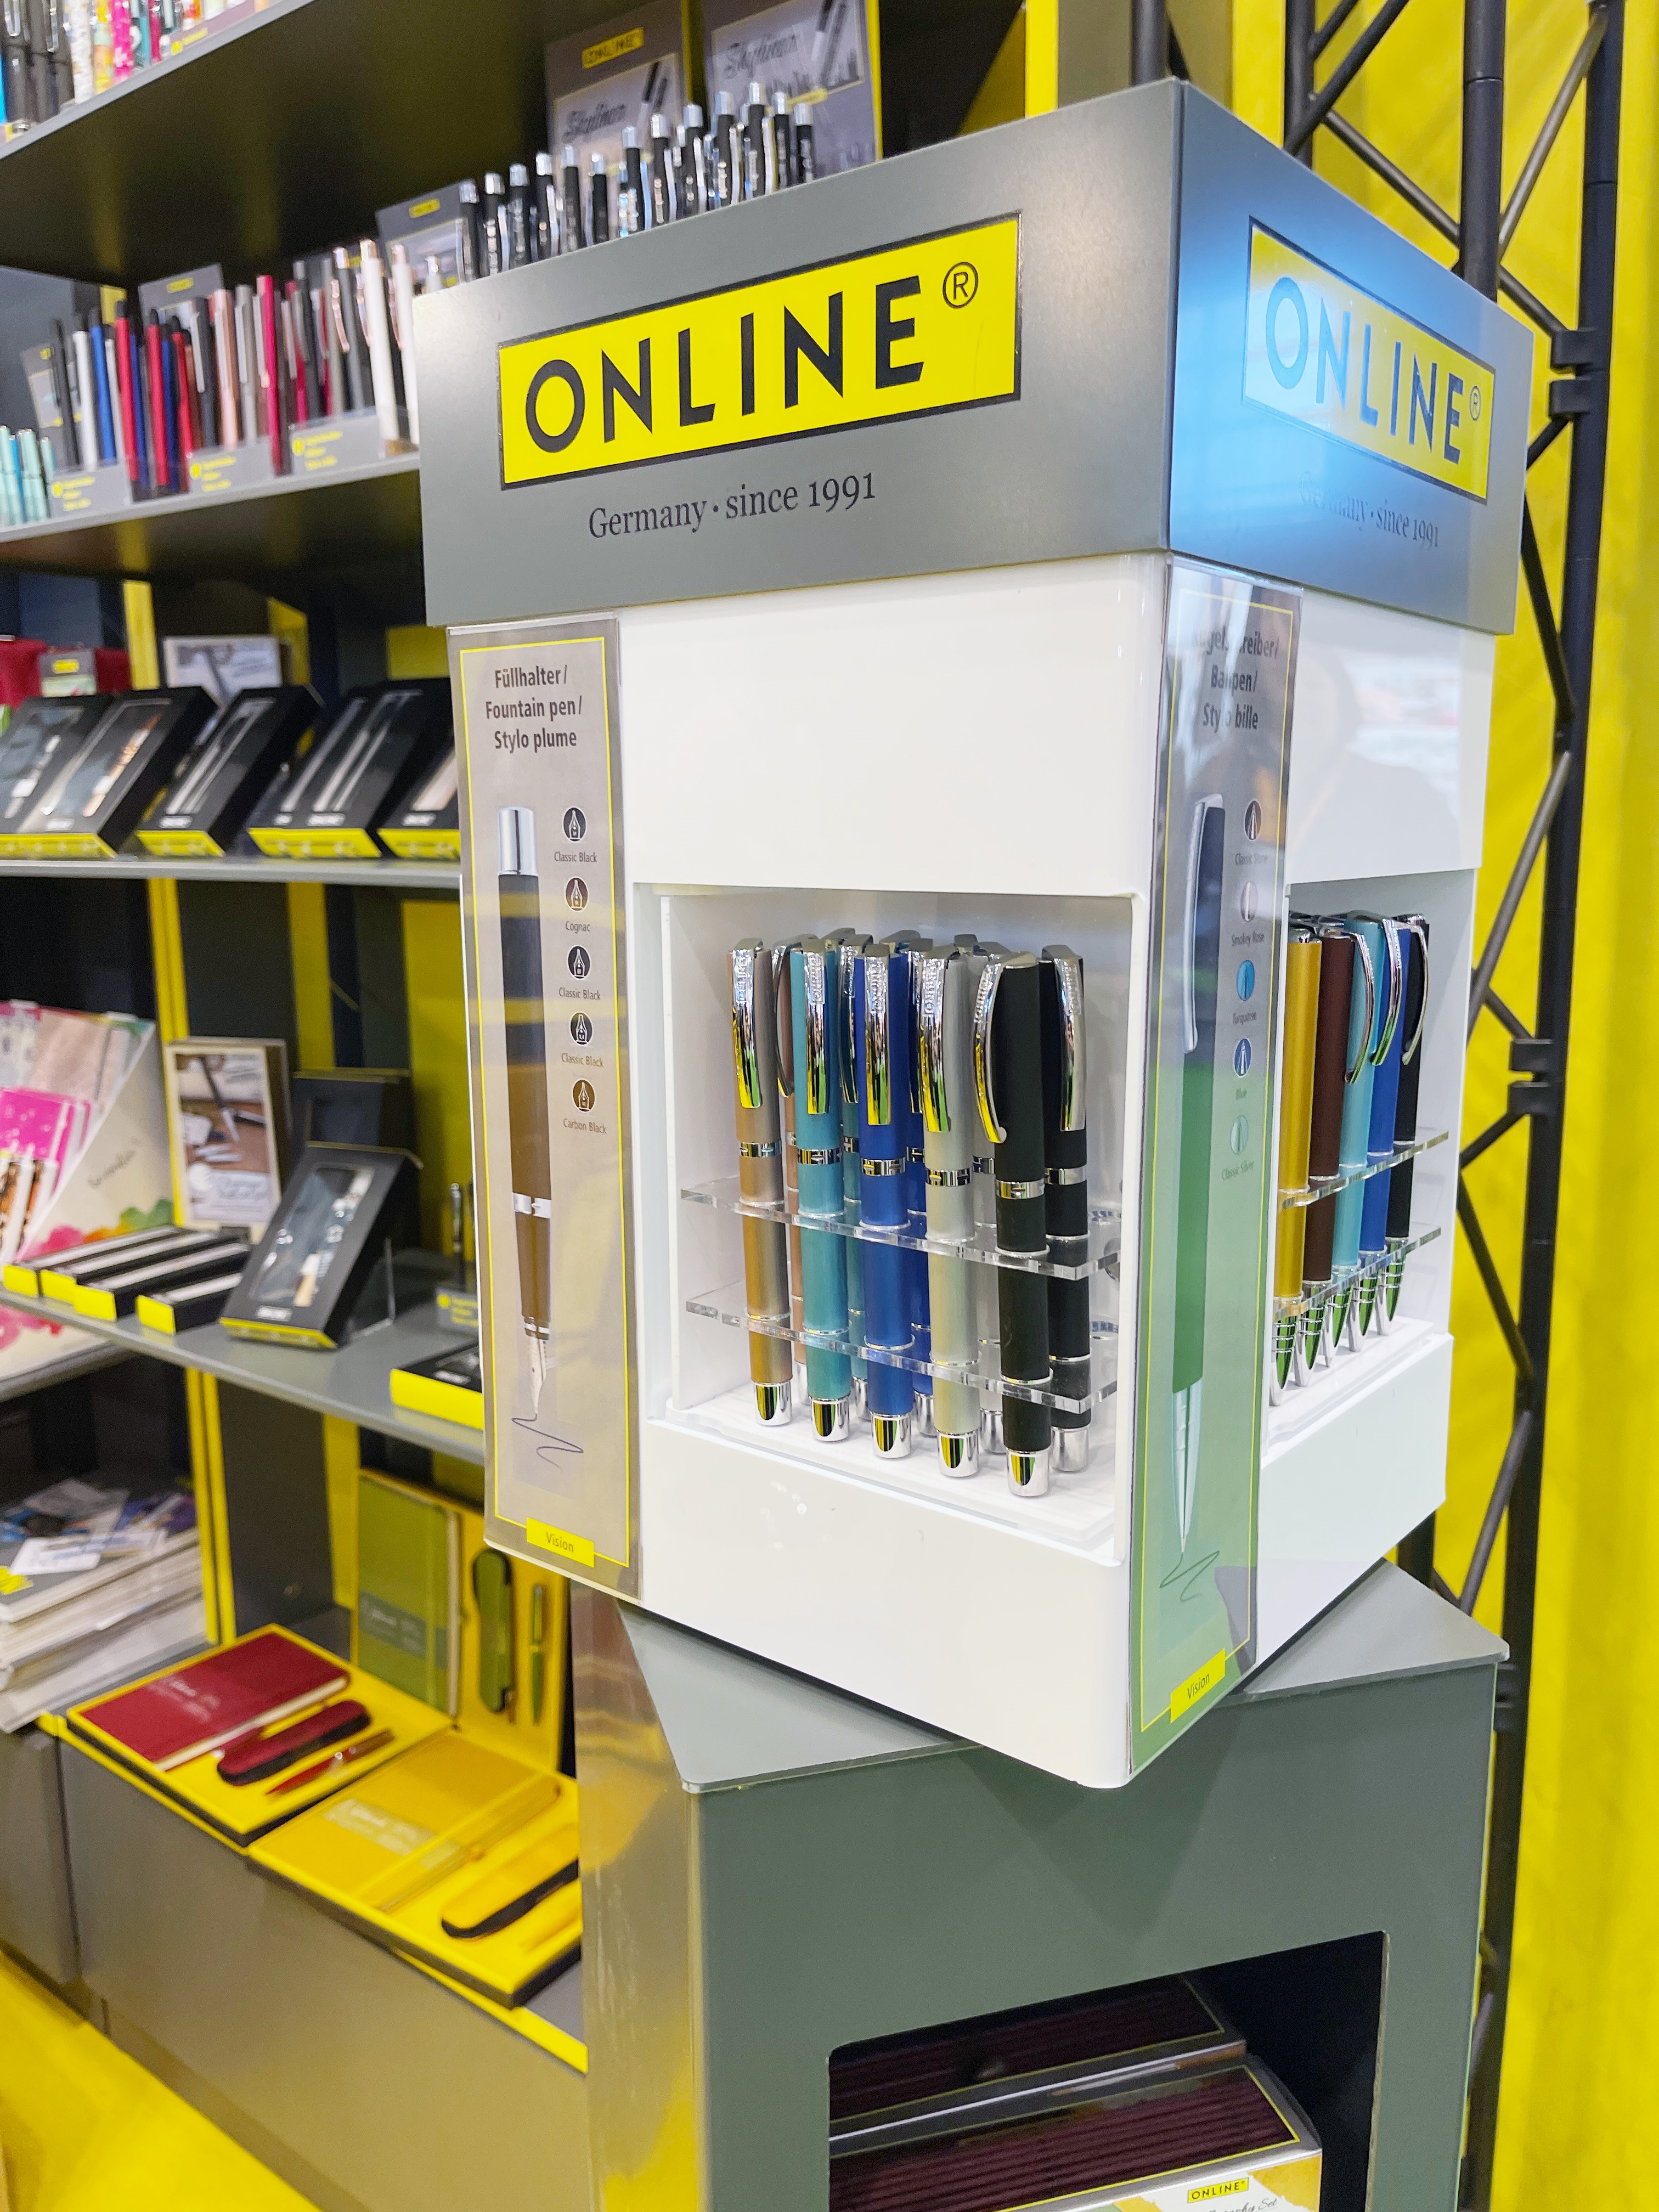 Online Schreibgeräte showcased both classic school supplies as well as writing instruments and paper for DIY projects.